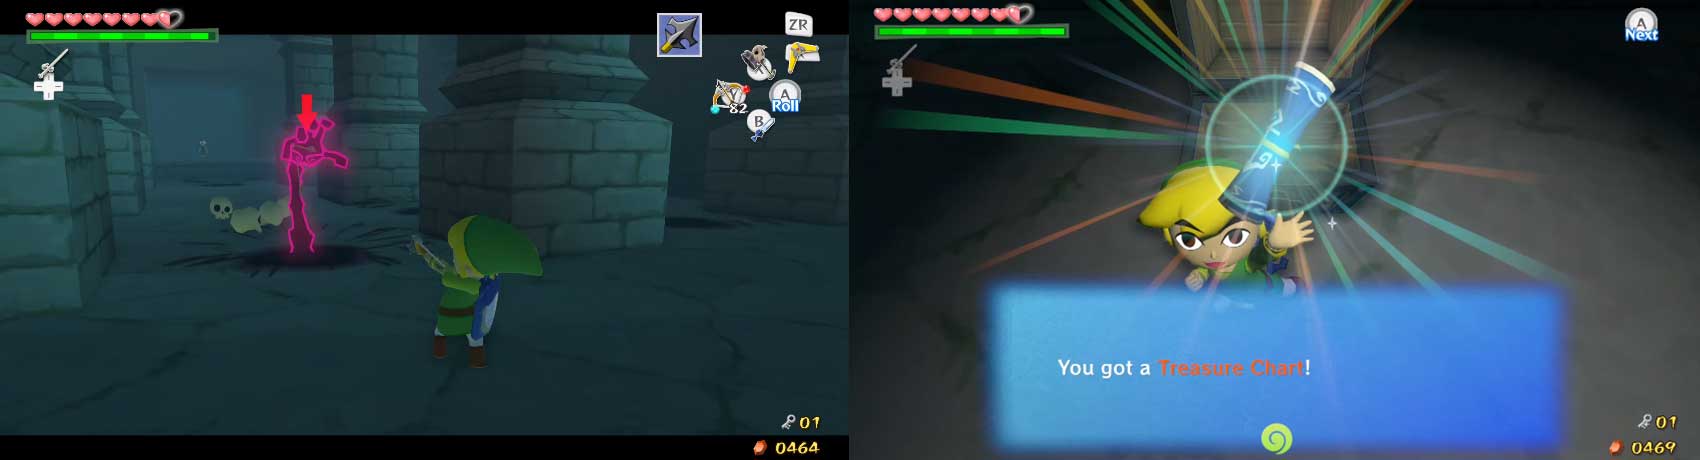 If you want a Treasure Chart (#12), defeat all of the Floormasters and open the chest that appears. Whether you do that or not, go back to the previous room after getting the small key. You can still leave Medli while going through the east door.